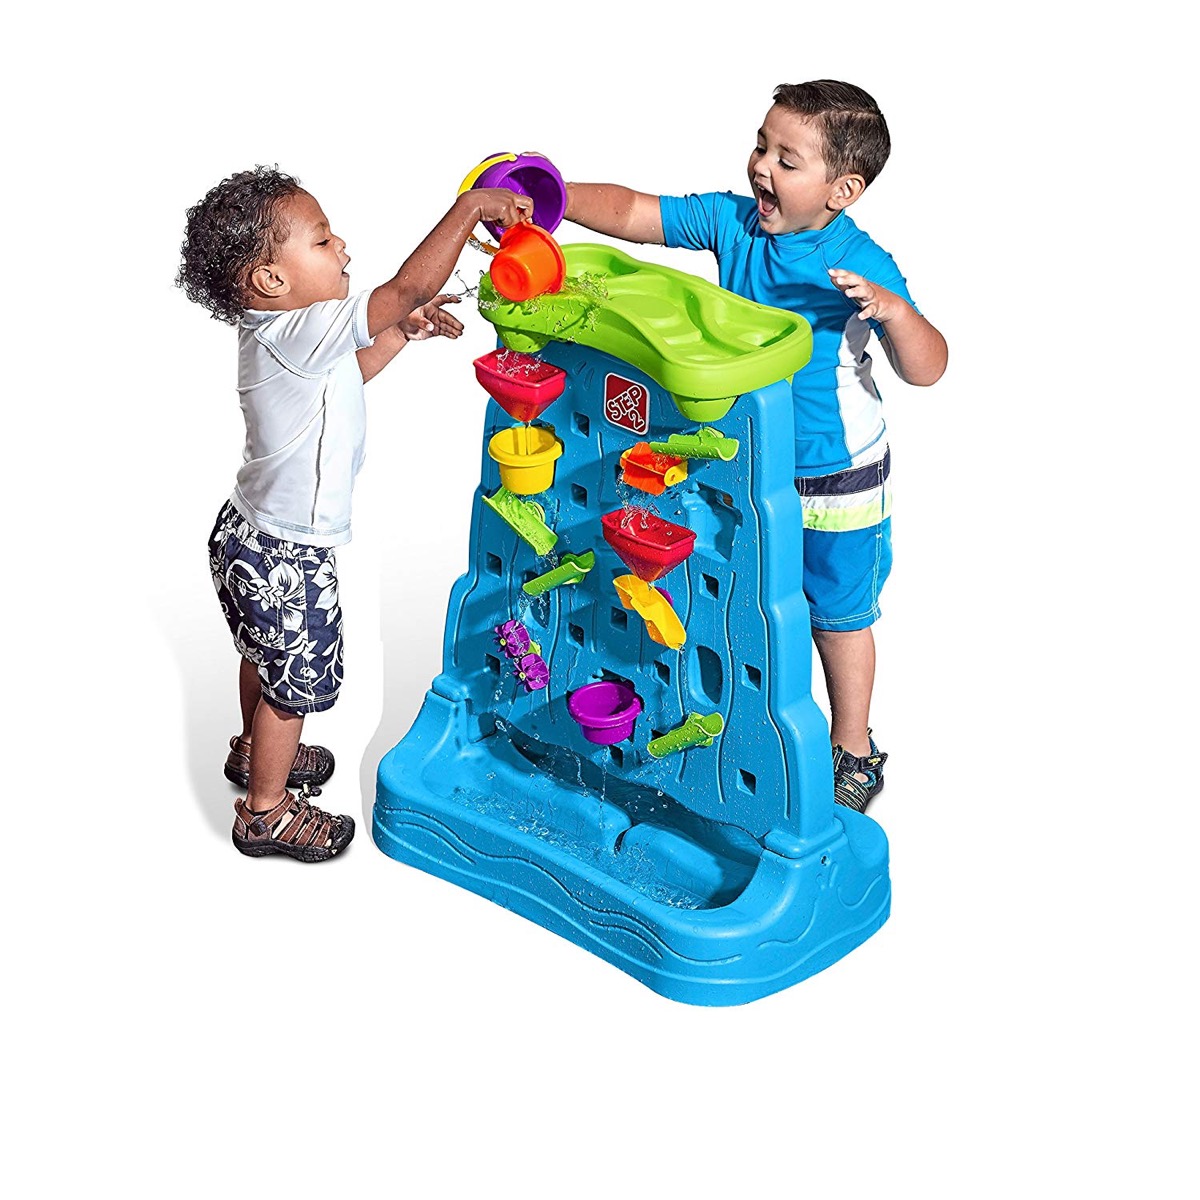 two children playing with a waterfall toy, best outdoor toys for toddlers